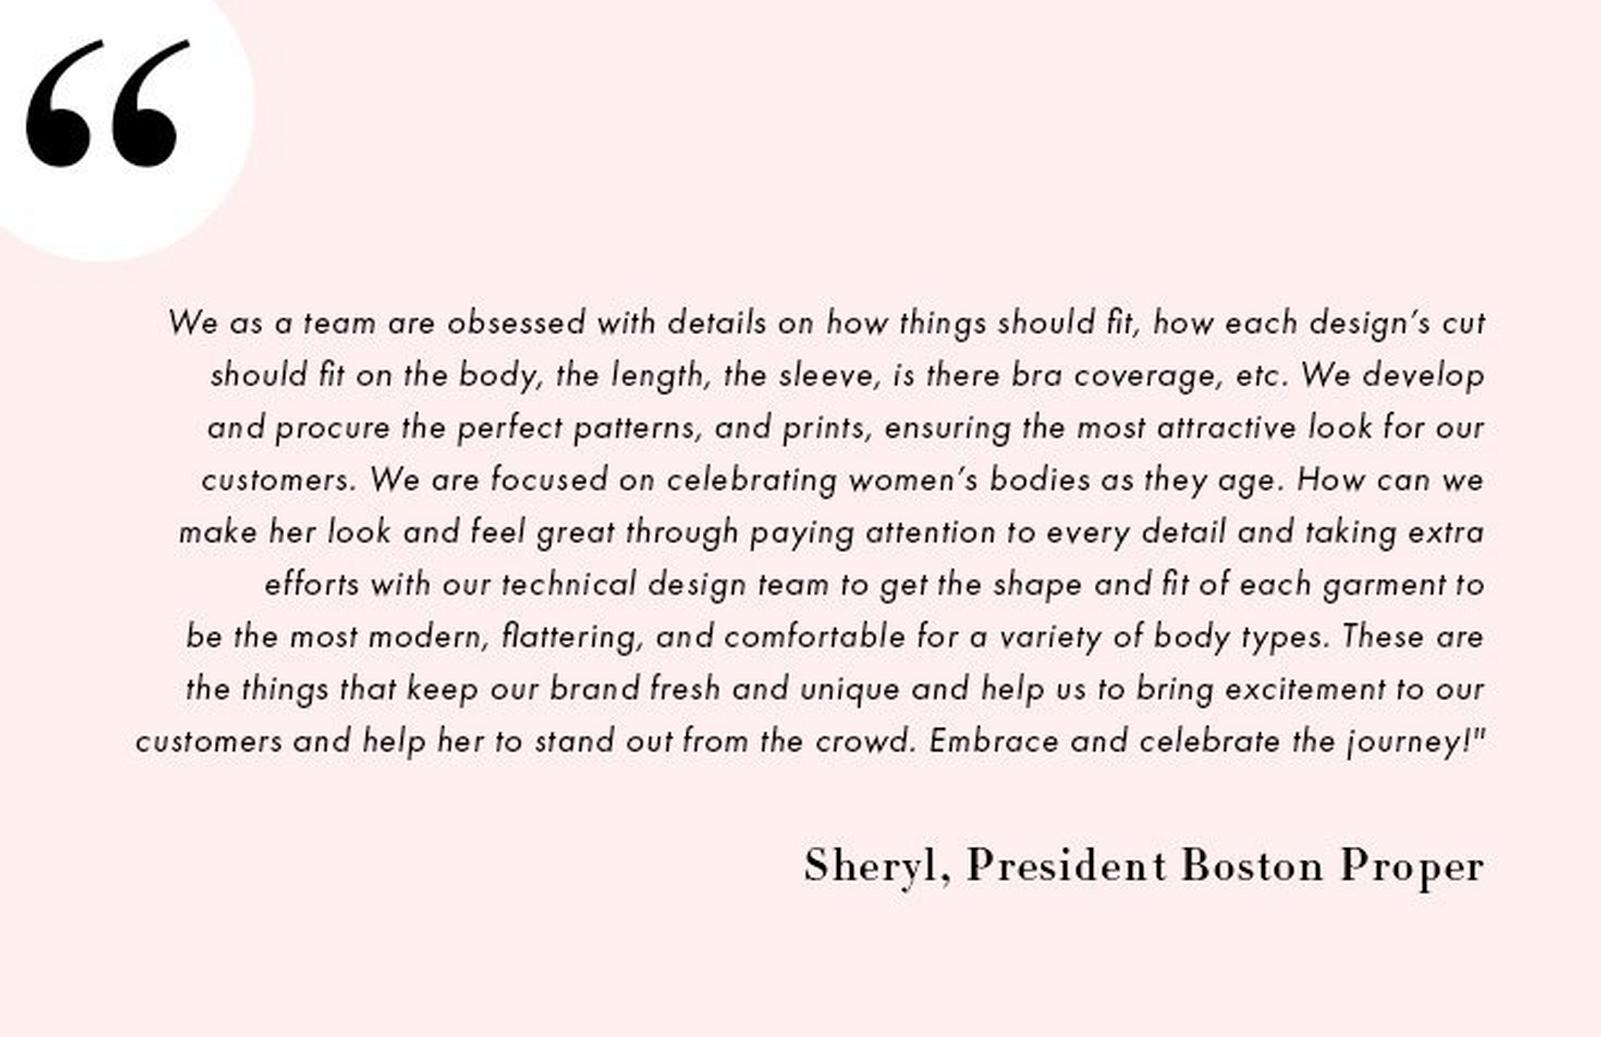 a quote from sheryl, president of boston proper. black text on light pink background.